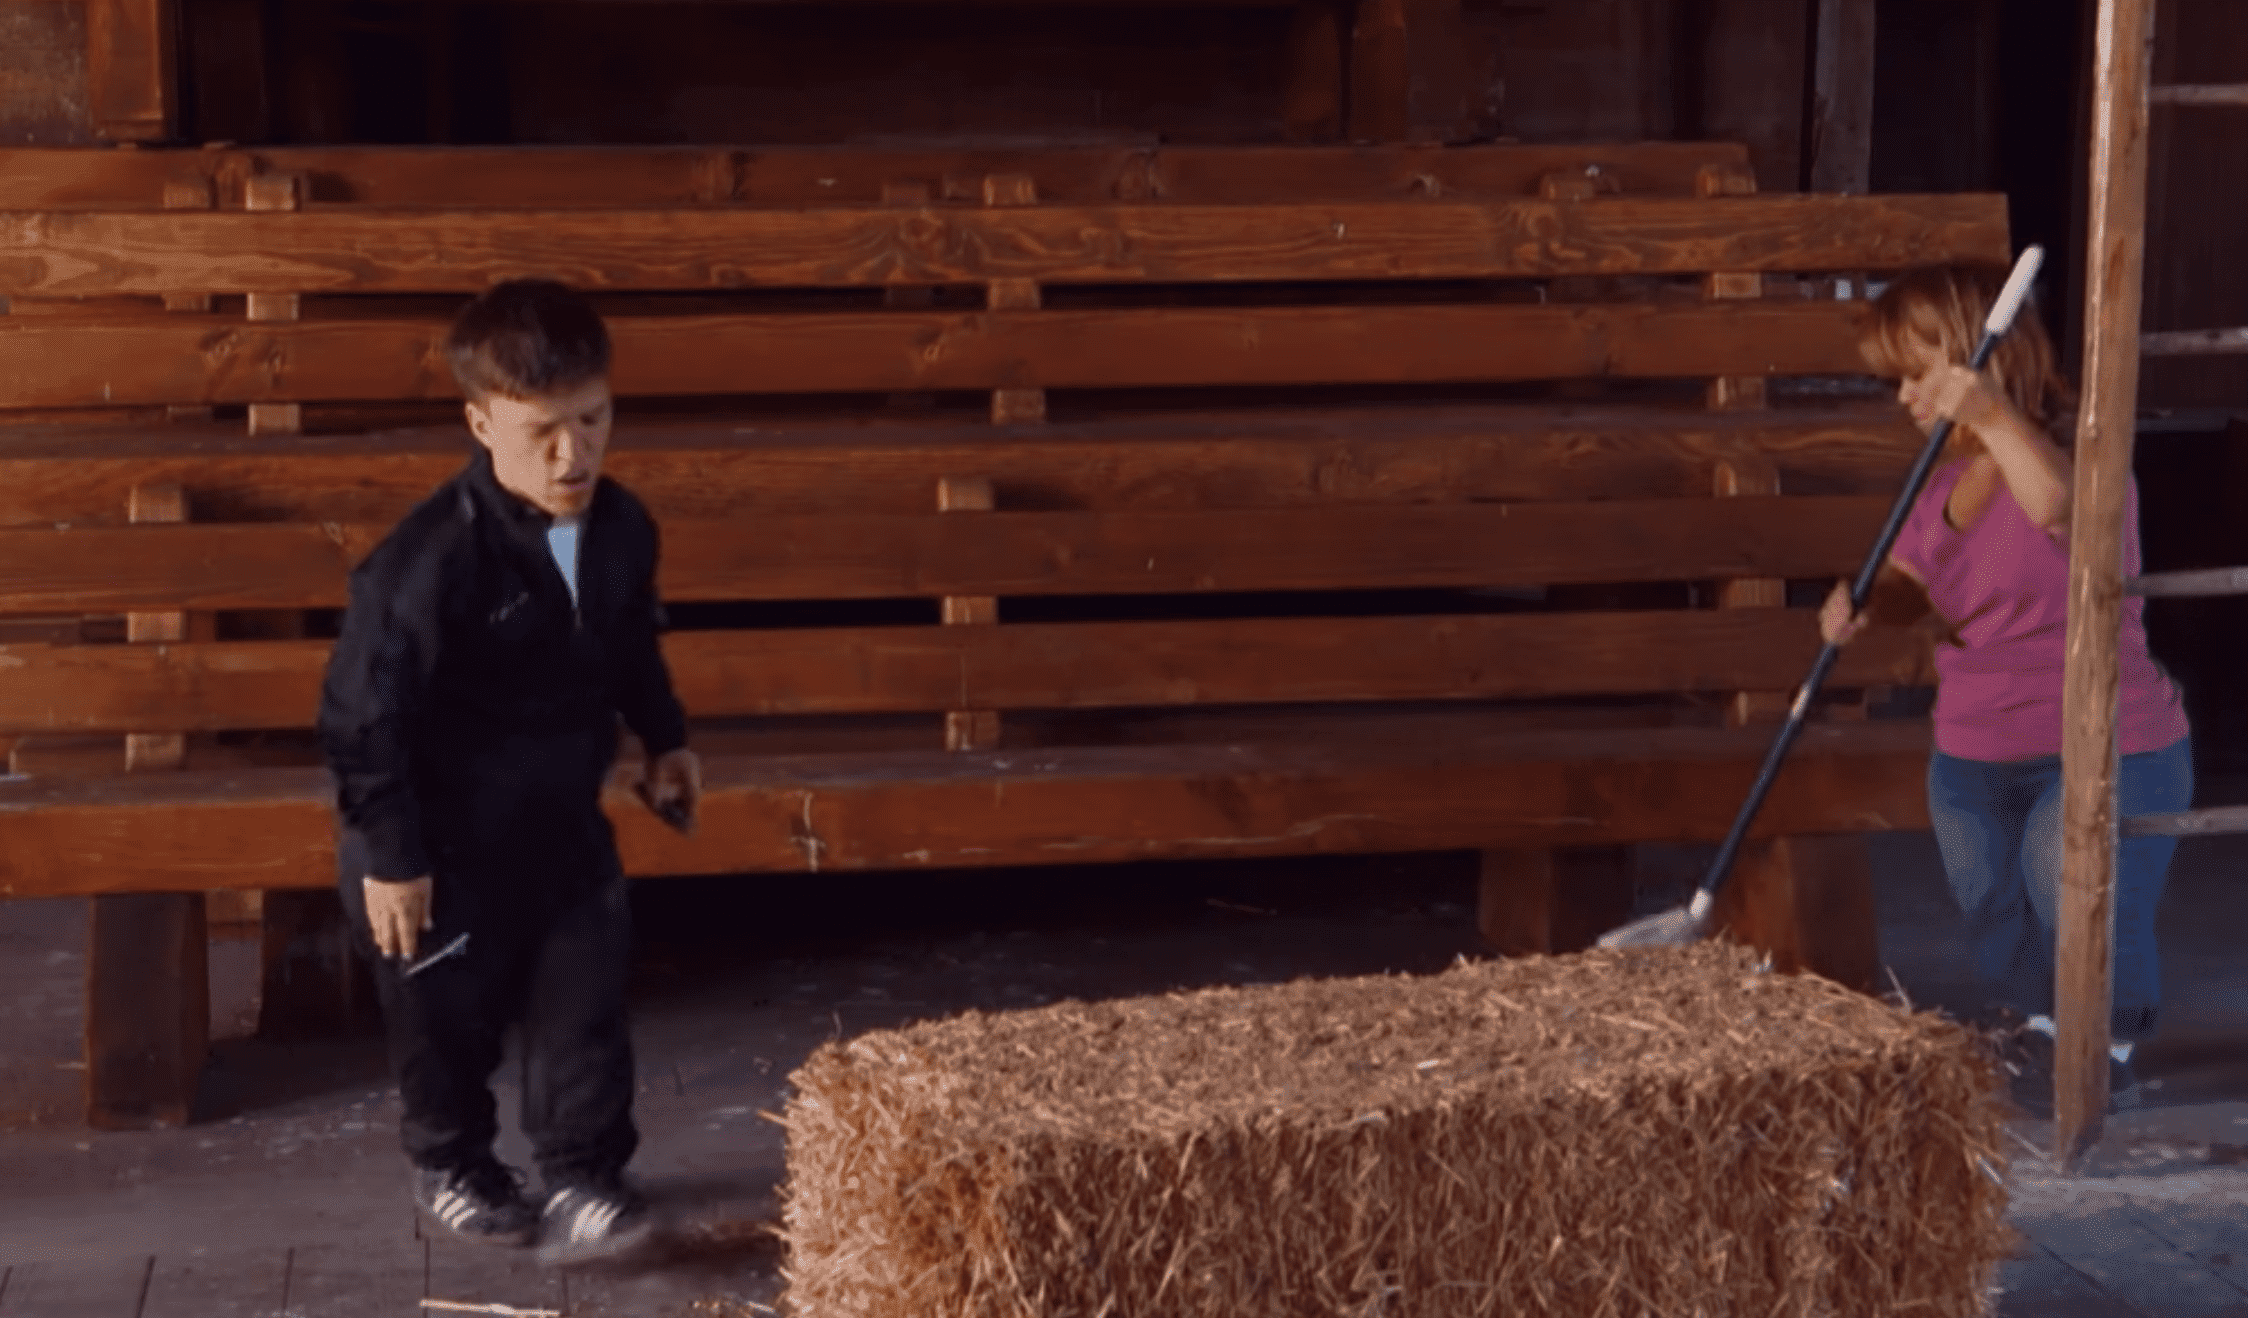 Amy and Zach clean up the barn in preparation for Jackson's birthday | Photo: Facebook/Little People, Big World